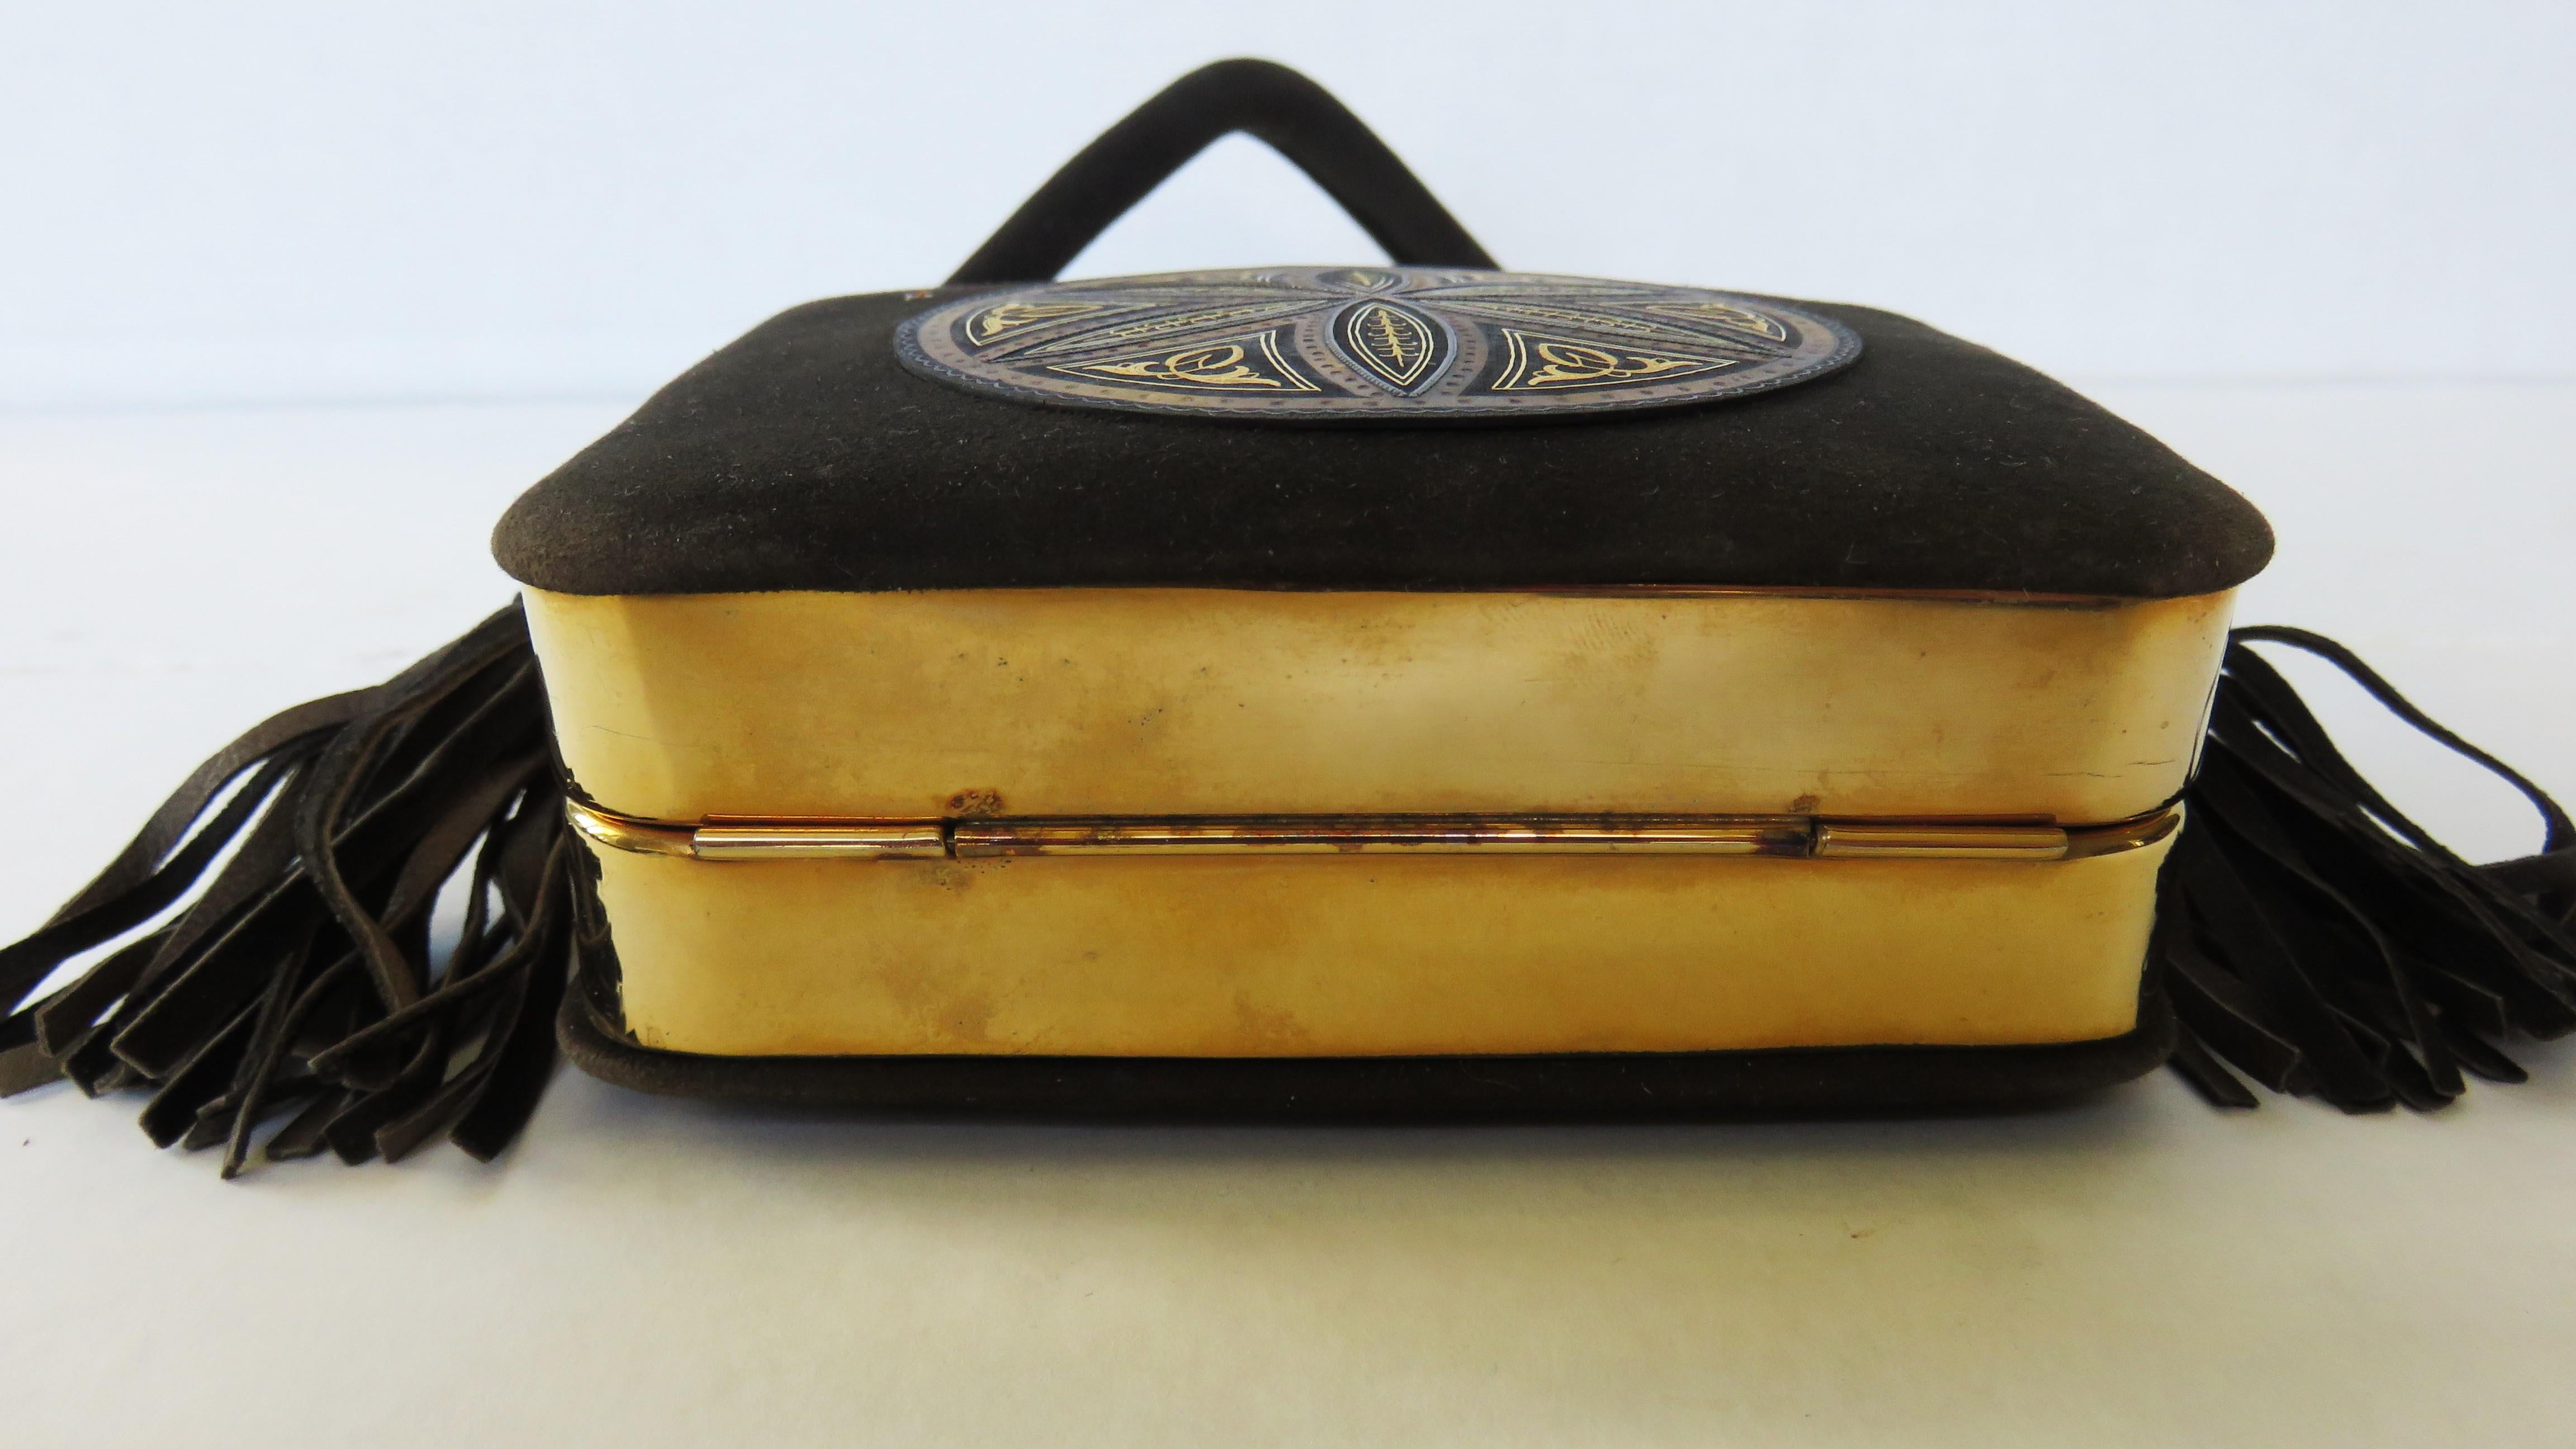  1950s Suede Minaudiere Compact Evening Bag with Medallion Front For Sale 7